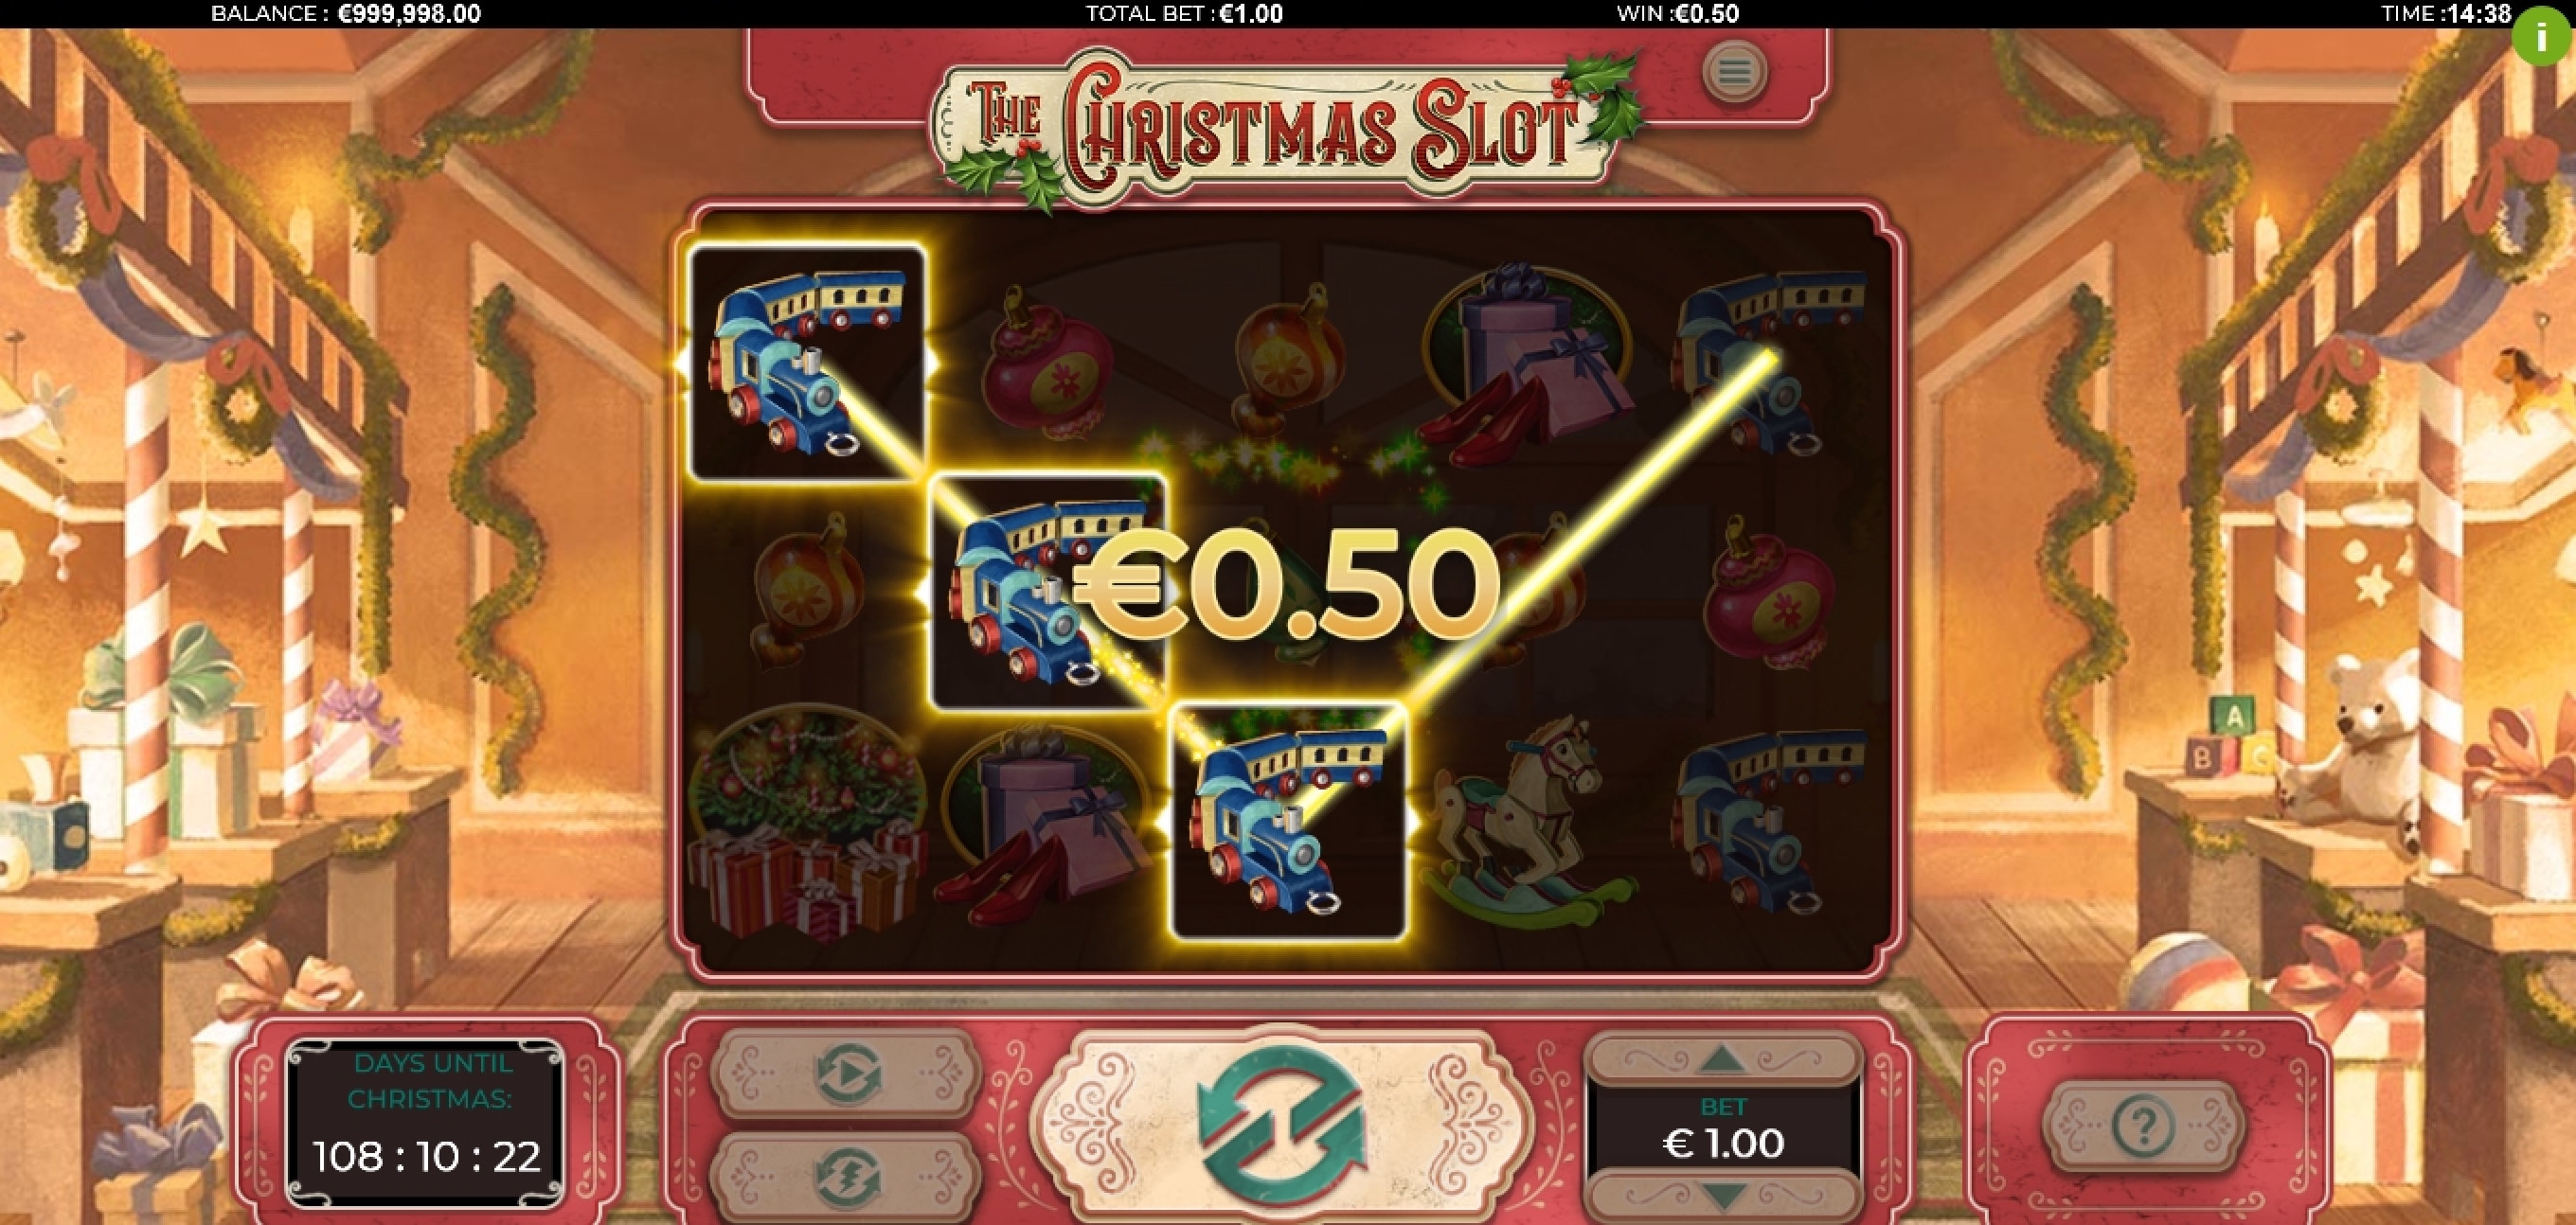 Win Money in The Christmas Slot Free Slot Game by Green Jade Games